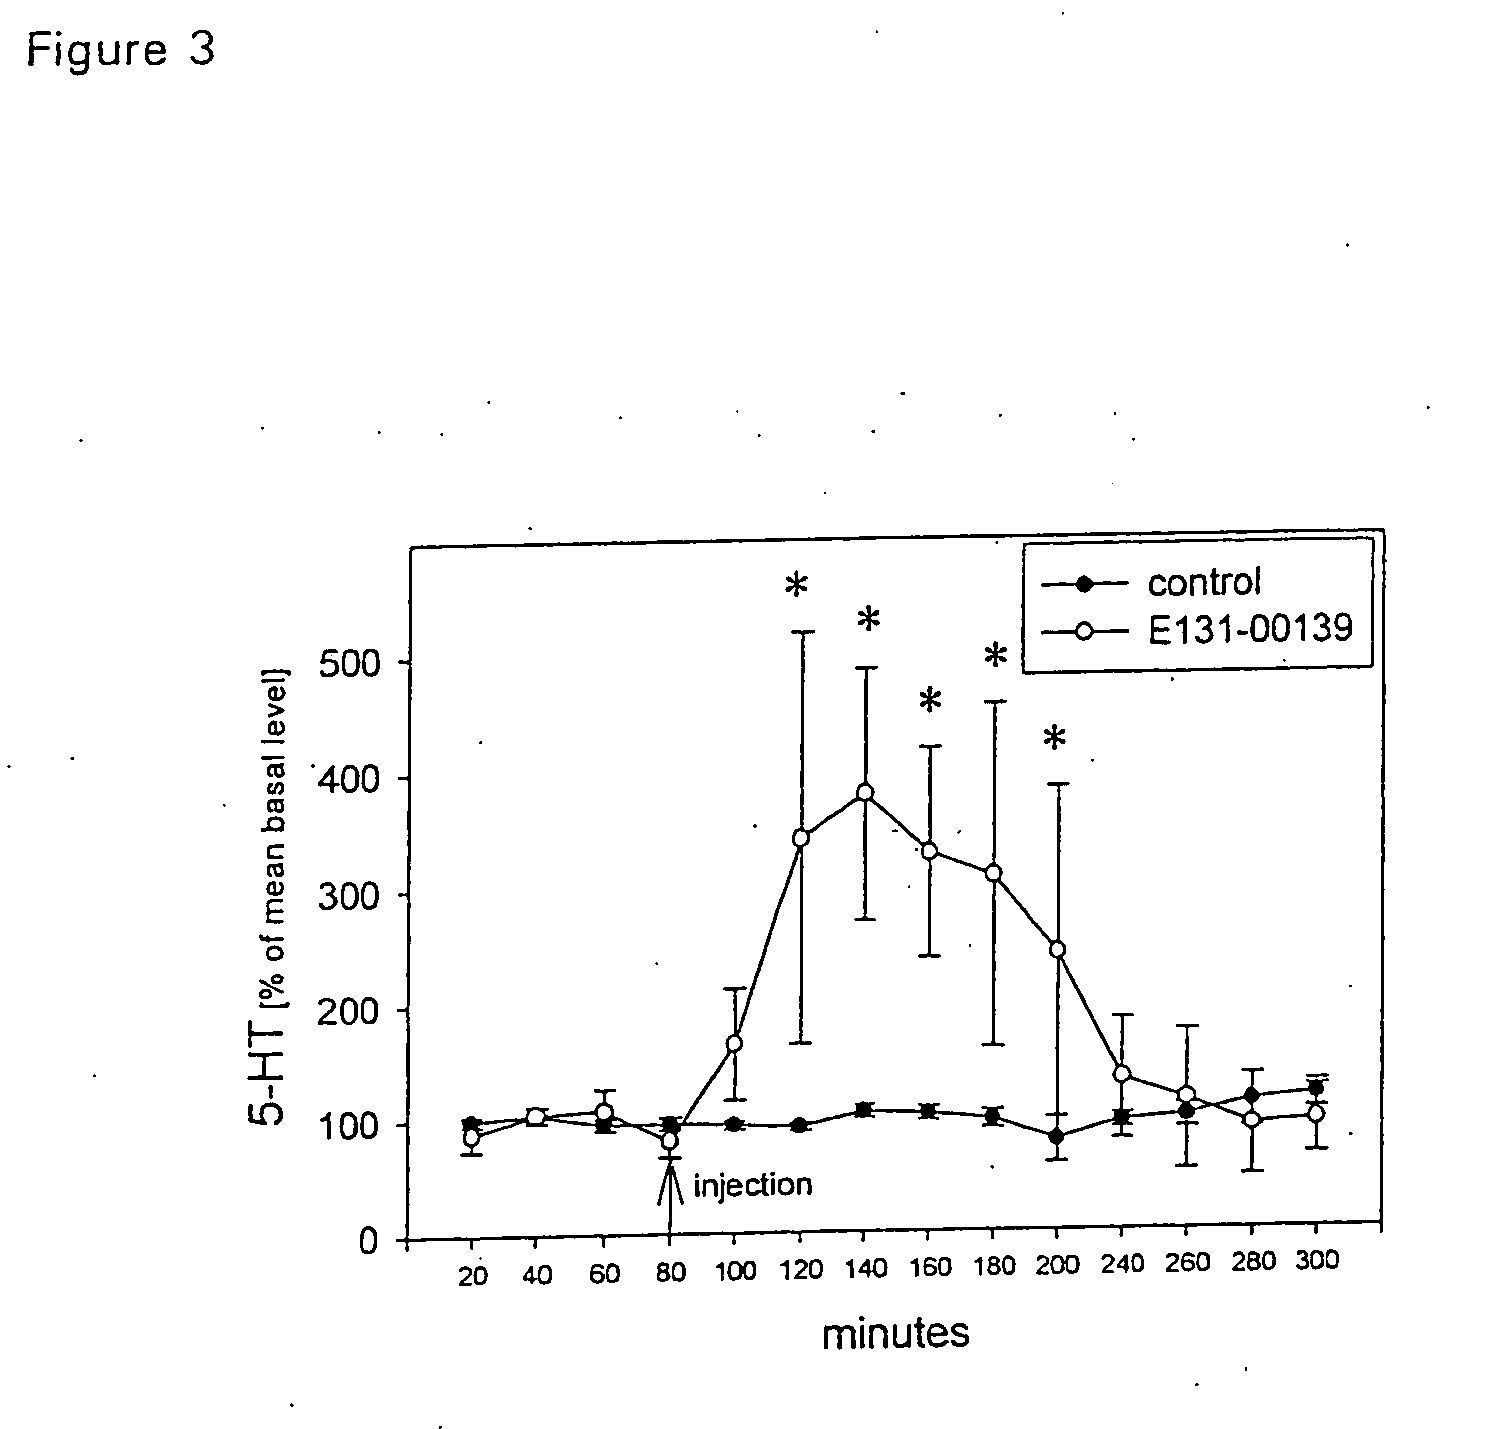 Method of treating or preventing central nervous system disorders with compounds having selectivity for the alpha 3 subunit of the benzodiazepine receptor